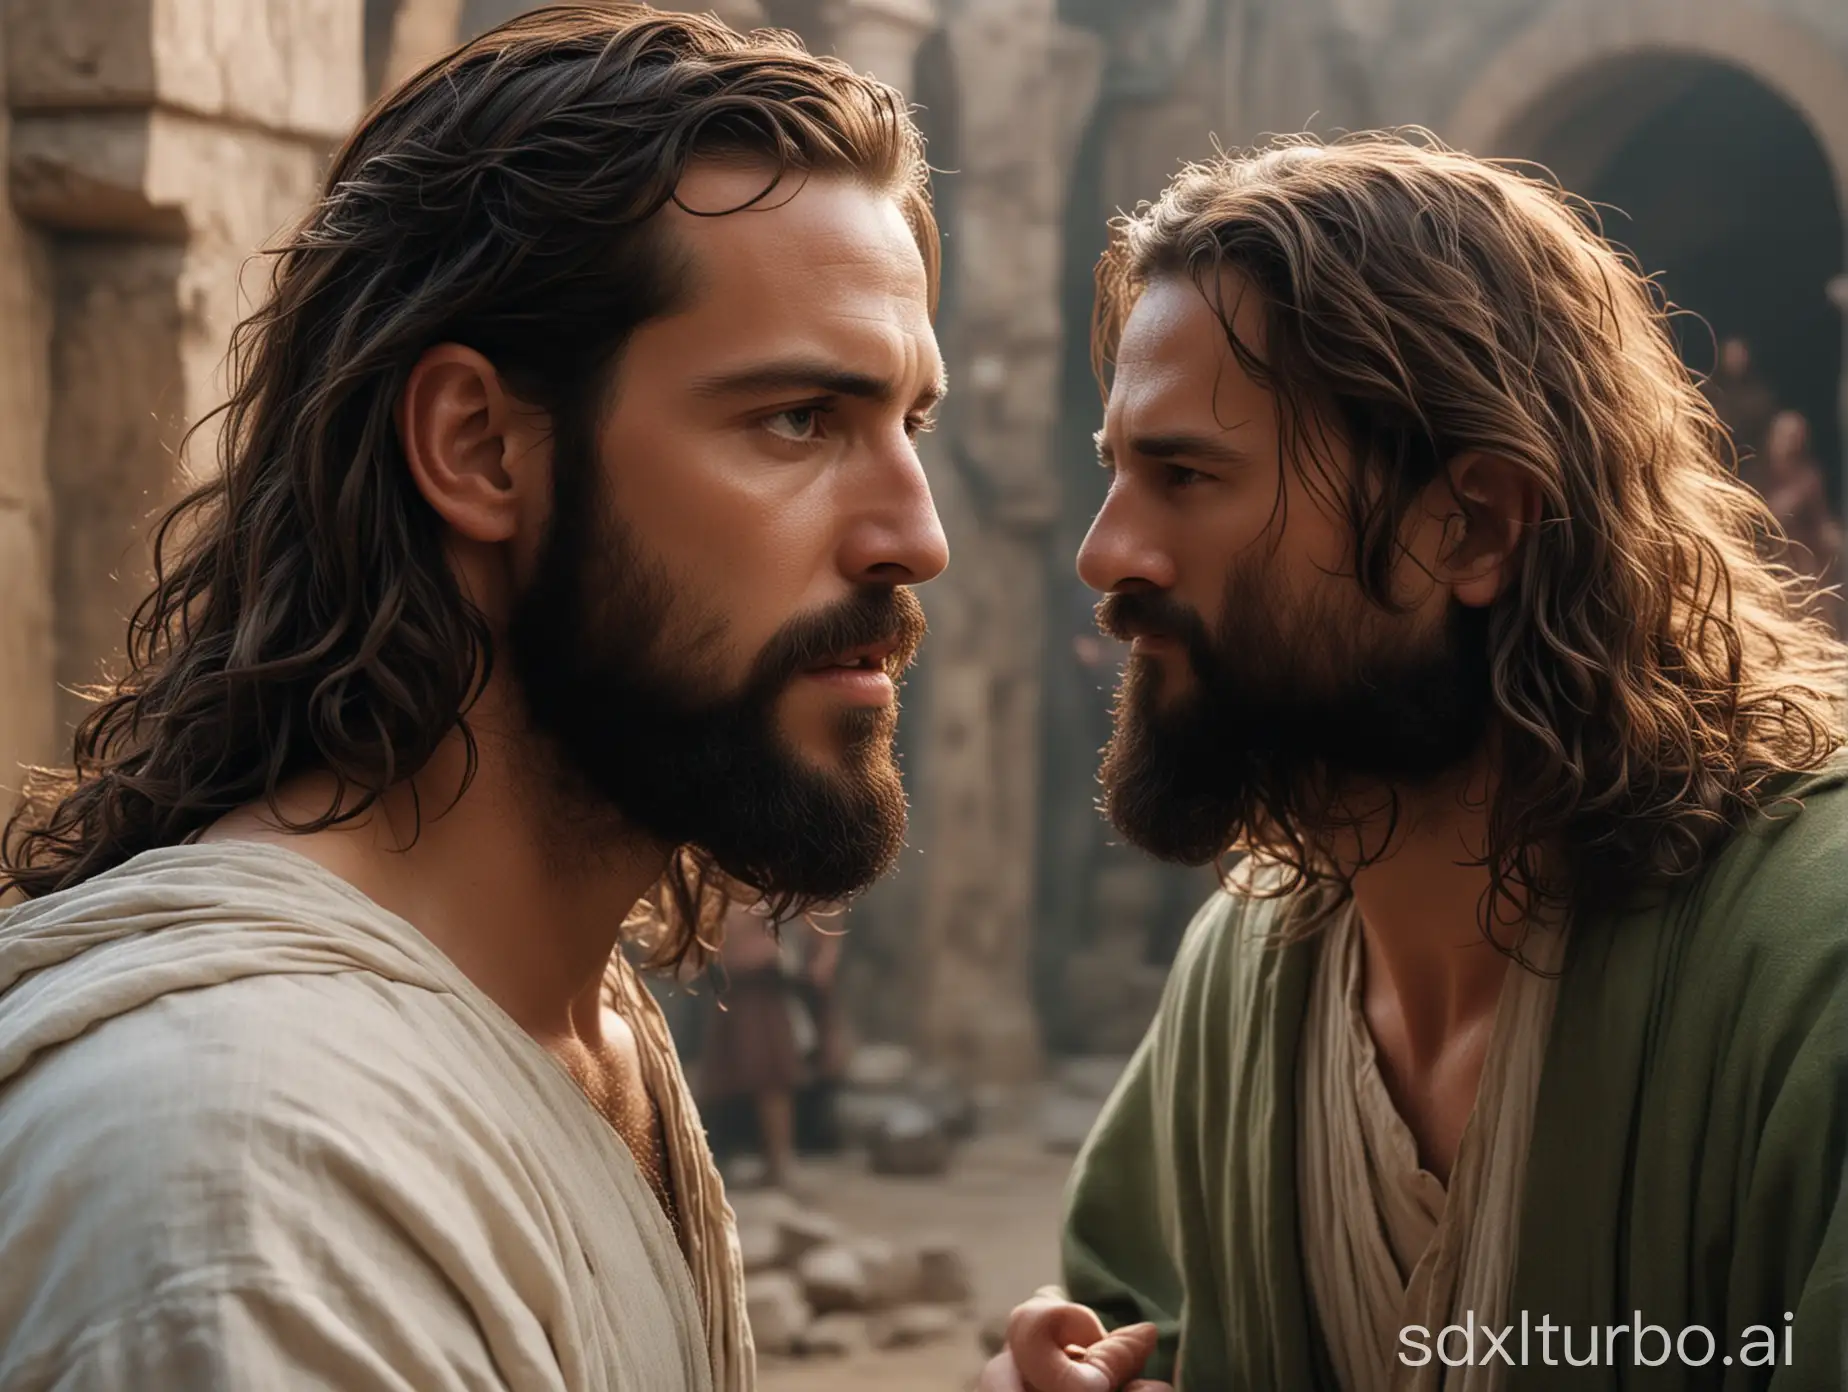 Dramatic-Confrontation-Scene-The-Passion-of-the-Christ-Characters-Engaged-in-Intense-Conversation